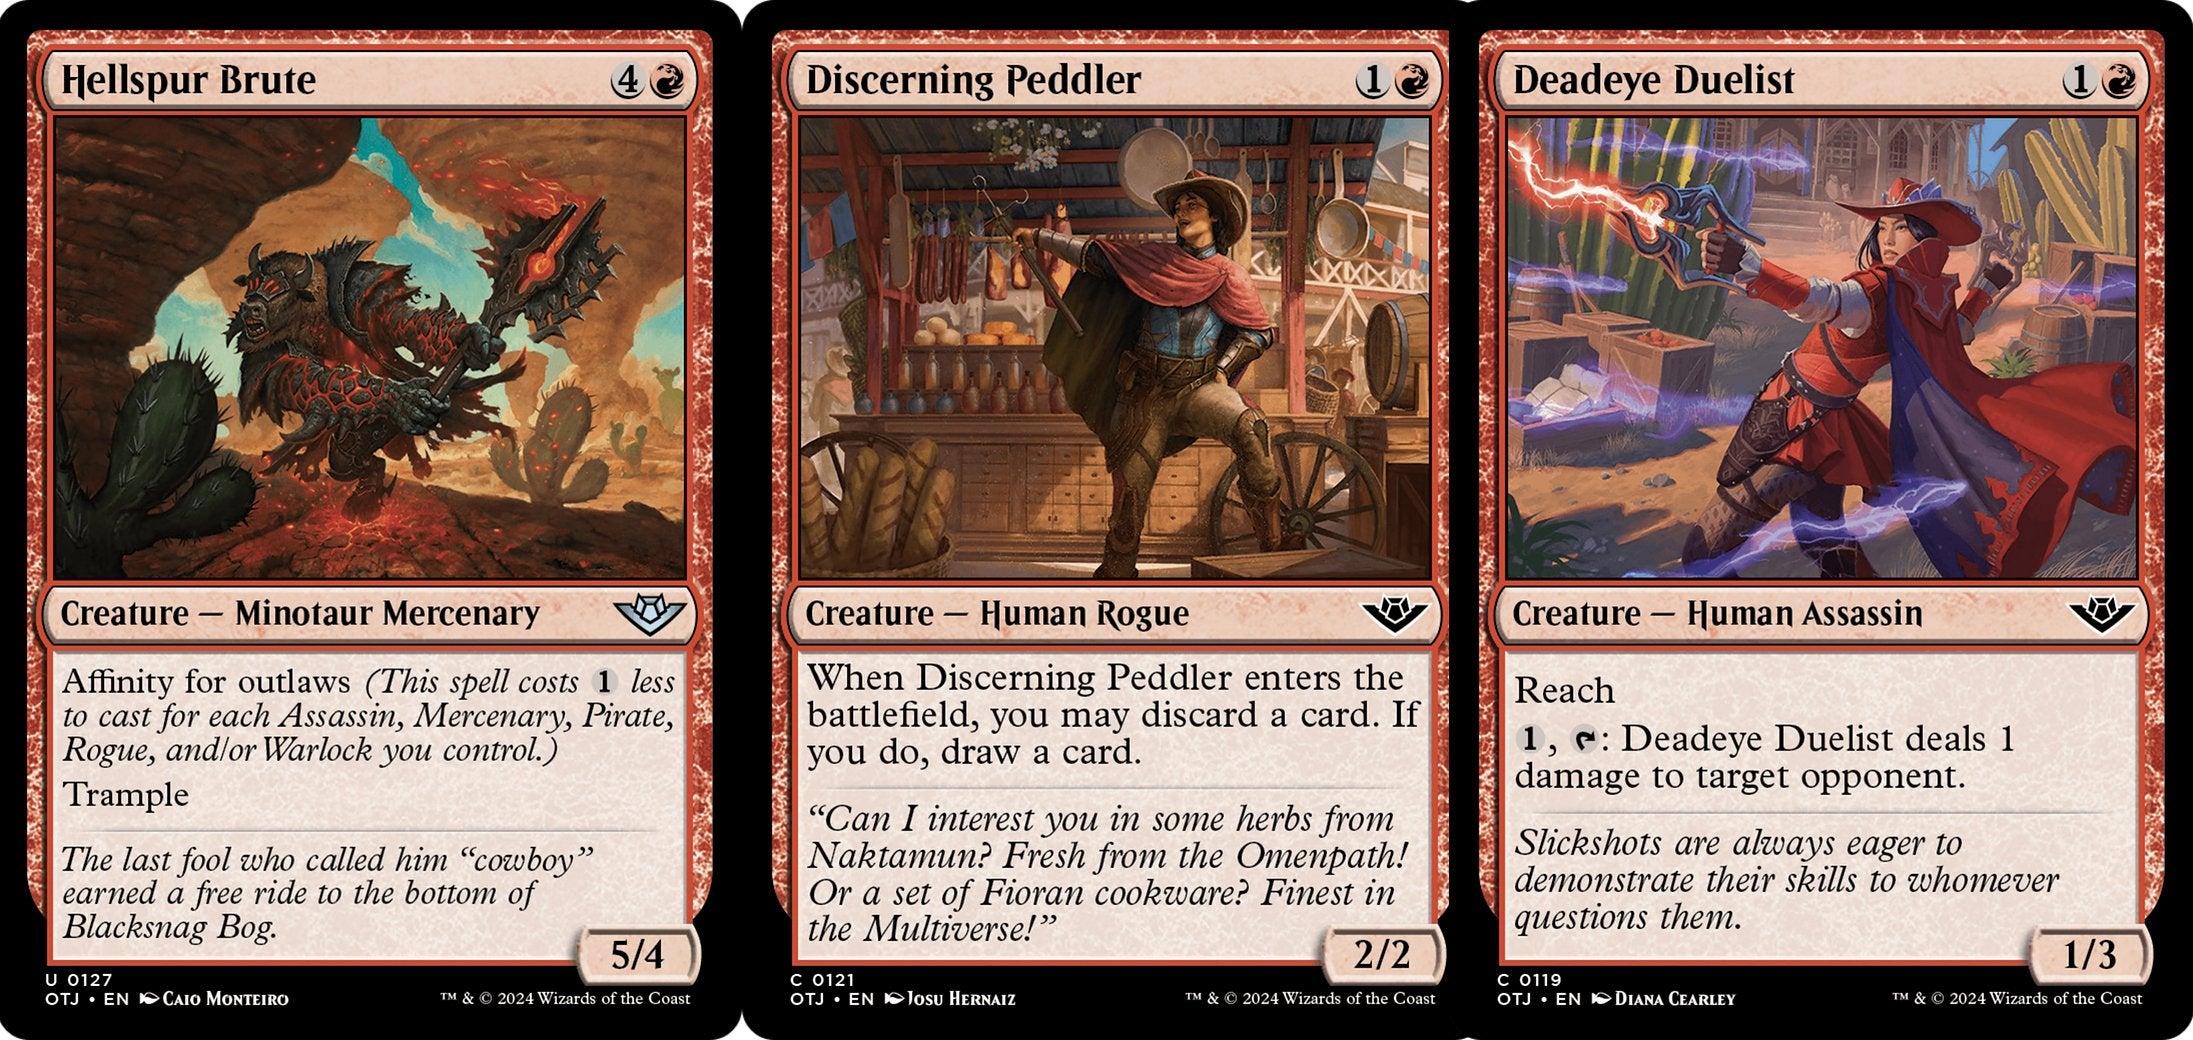 Hellspur Brute, Discerning Peddler, and Deadeye Duelist from MTG. All are Outlaw cards.